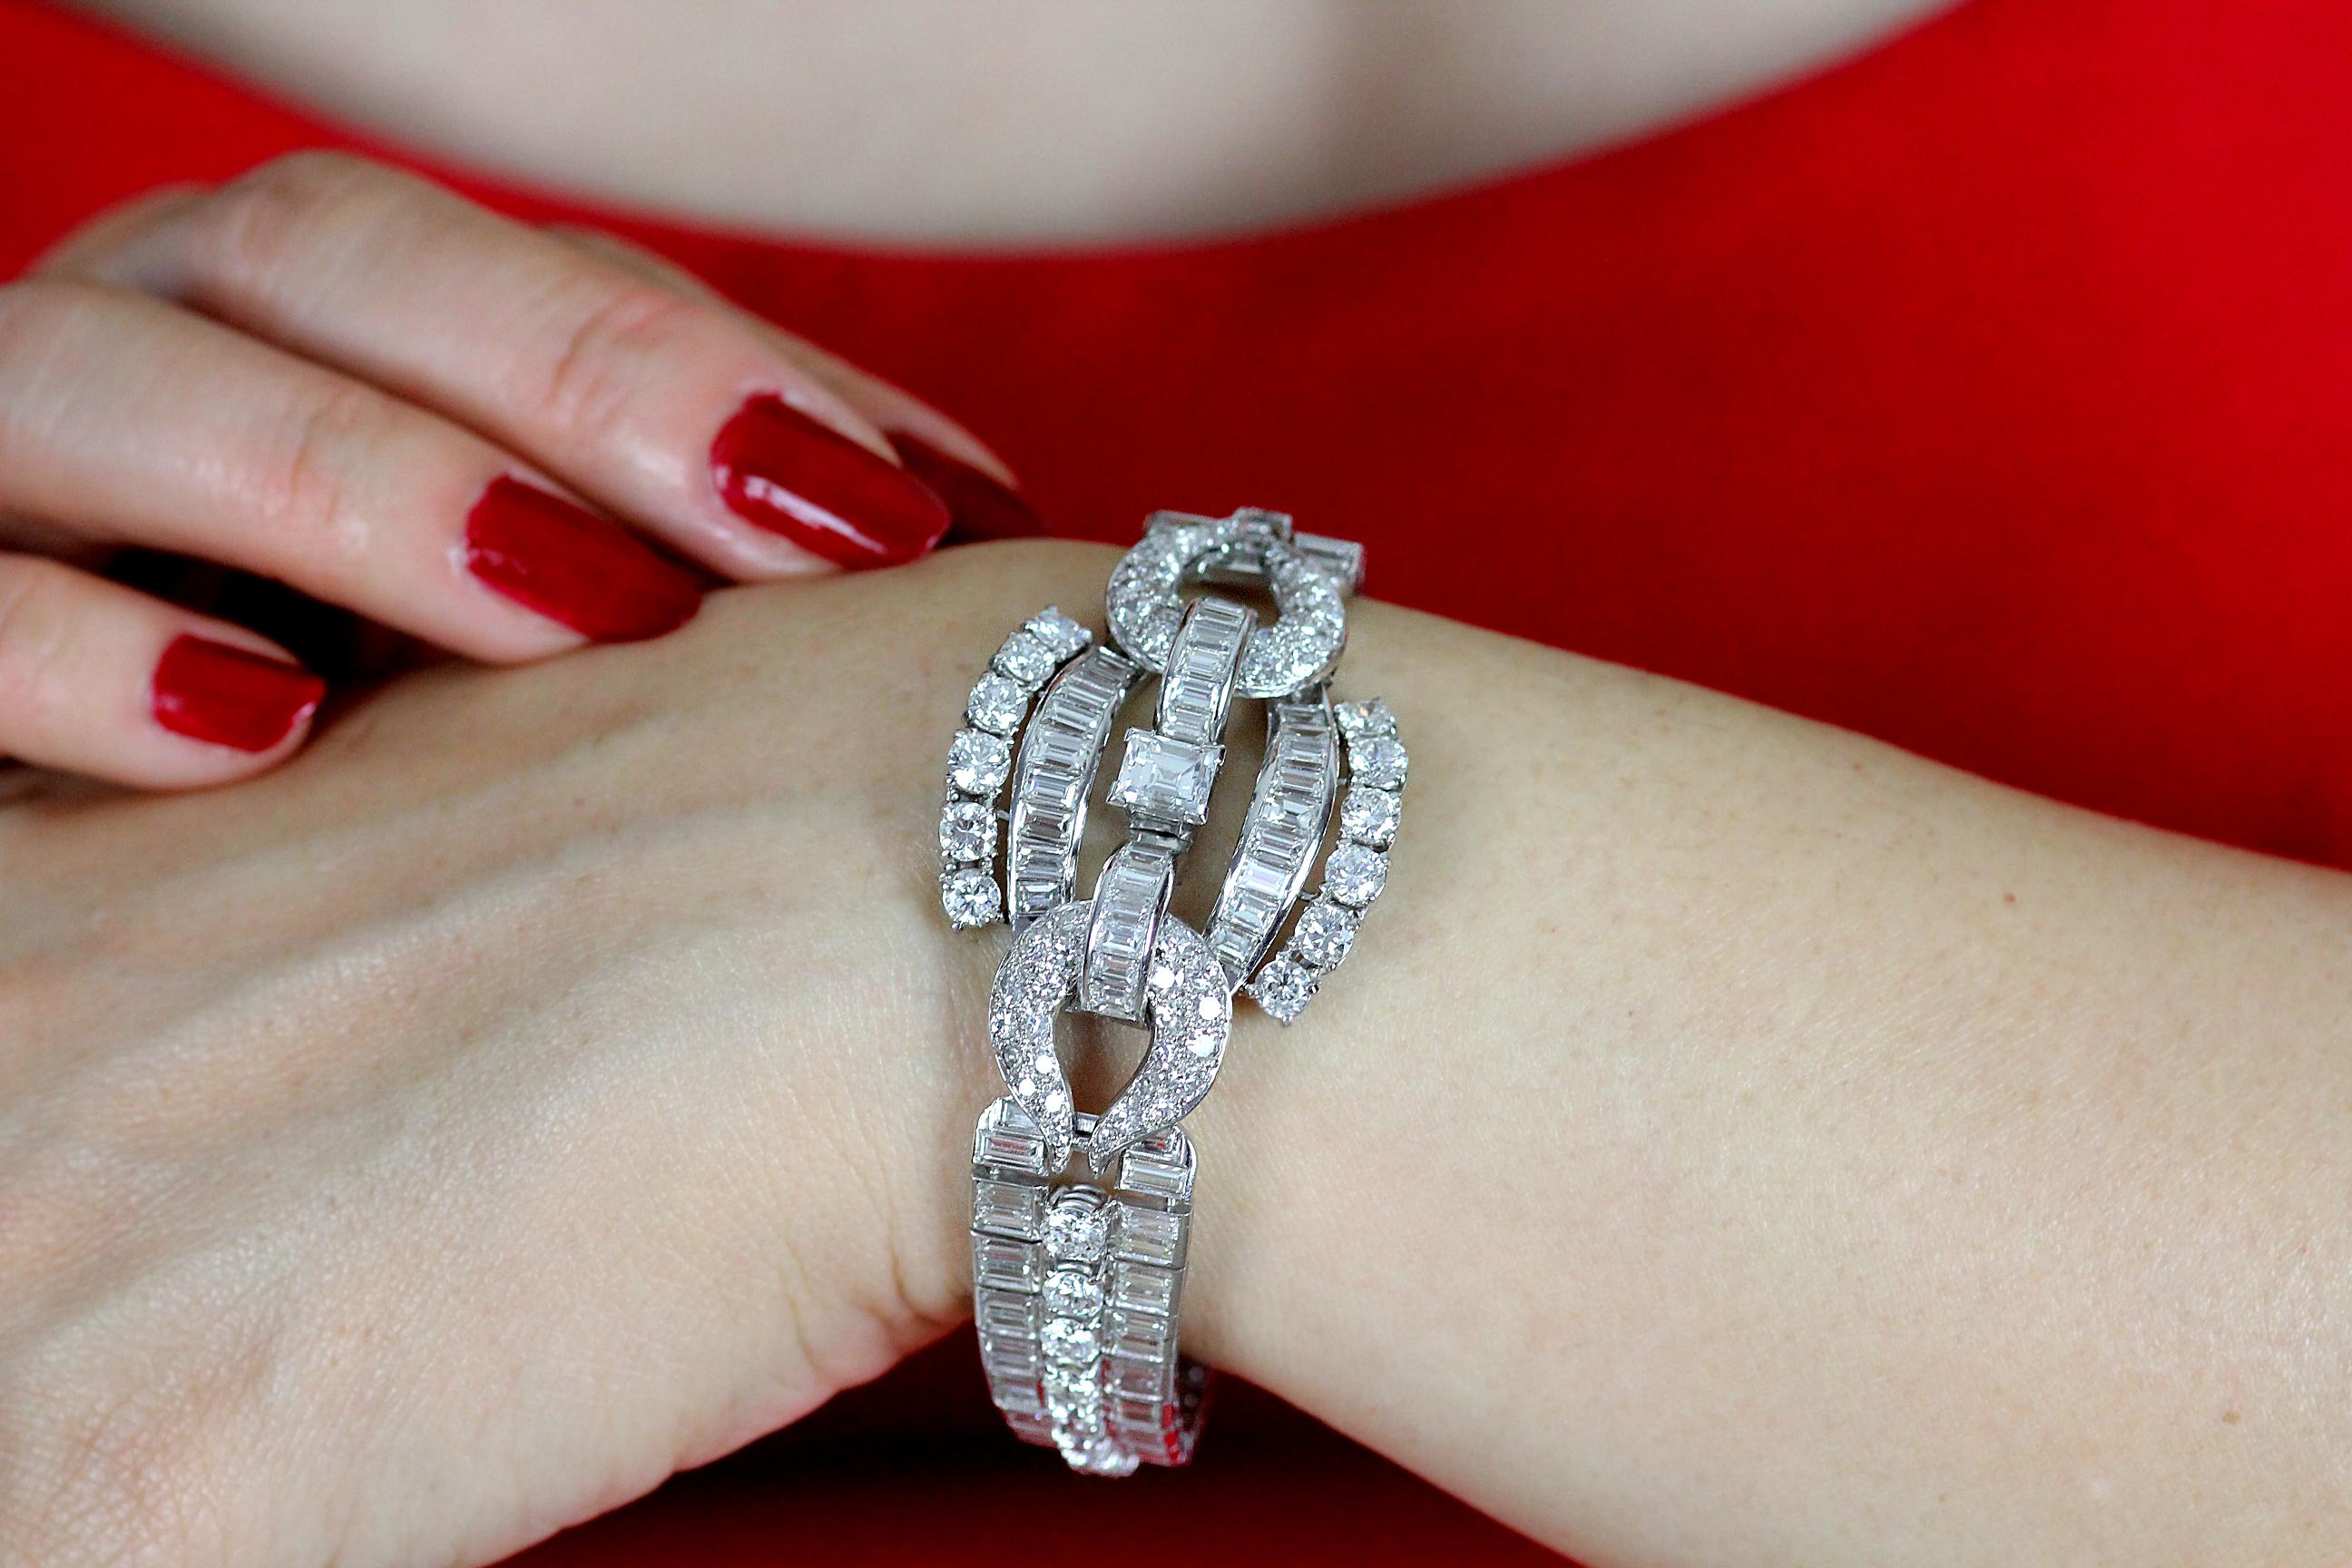 A splendorous 1940s in the Art Deco style bracelet, handcrafted in platinum. It features a mixture of exceptionally high quality round and baguette-cut diamonds. Light up the room in this stunning bracelet that will be sure to have everyone